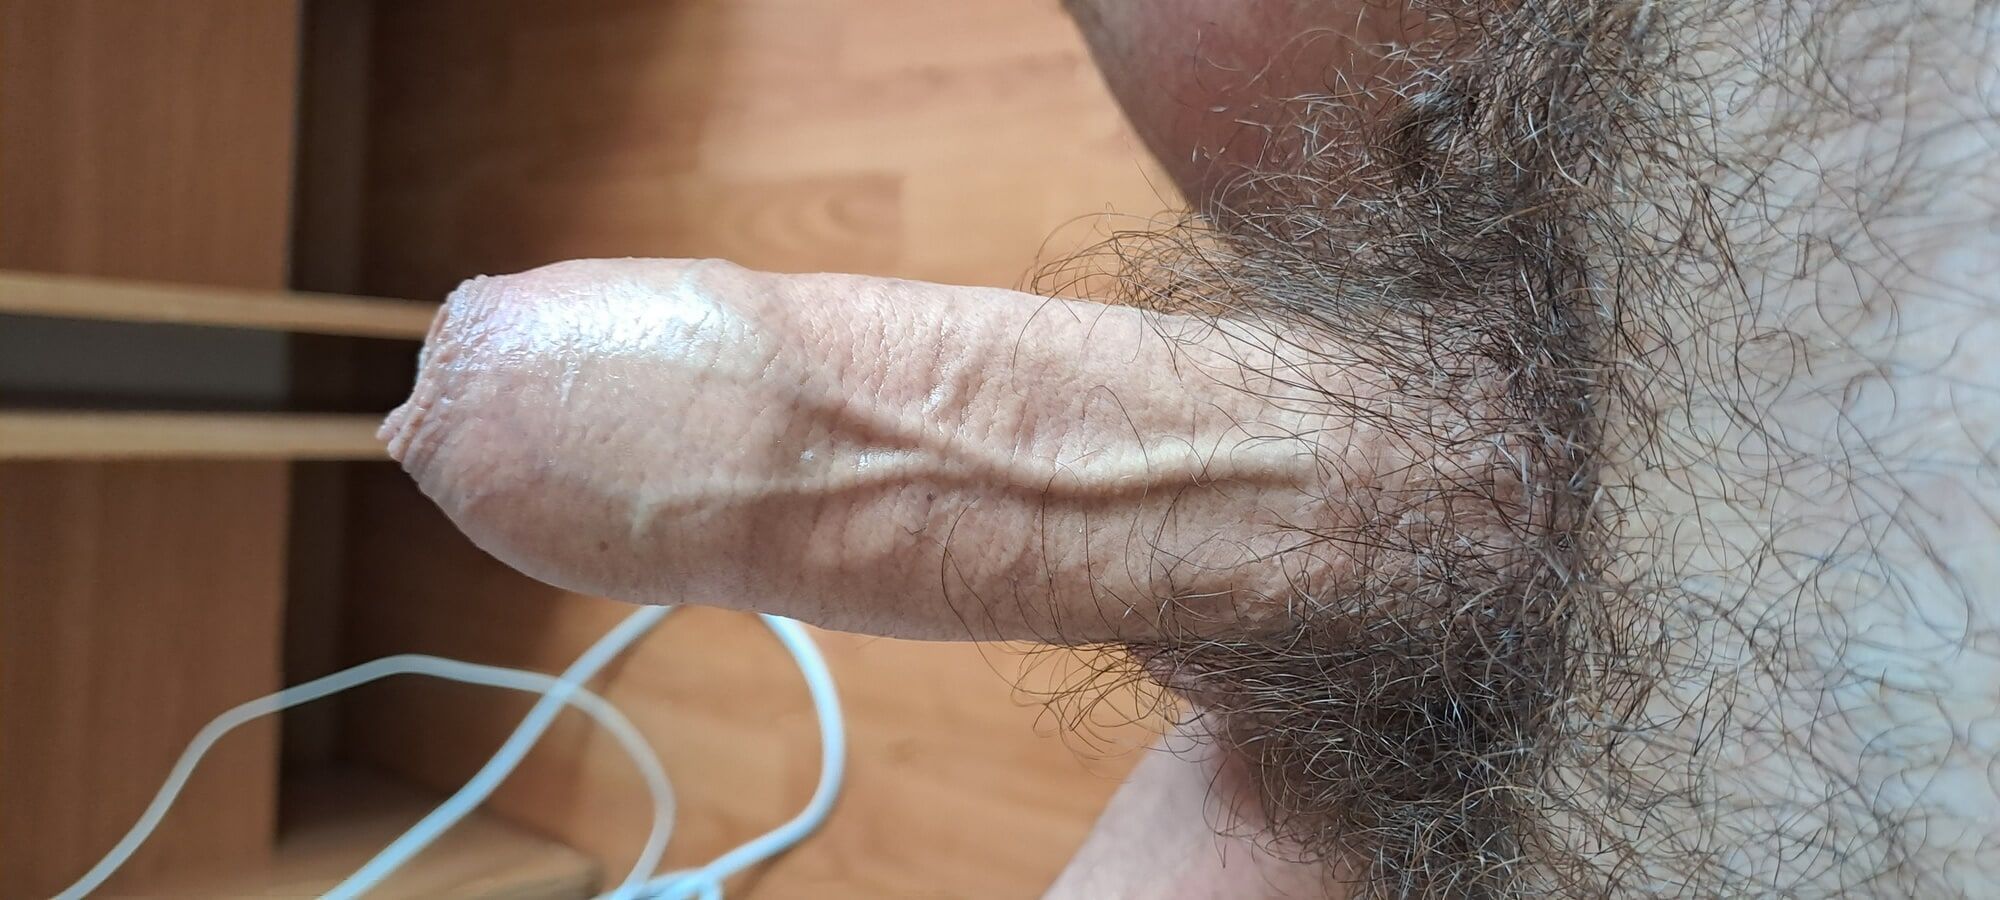 daddy's big hairy cock #60